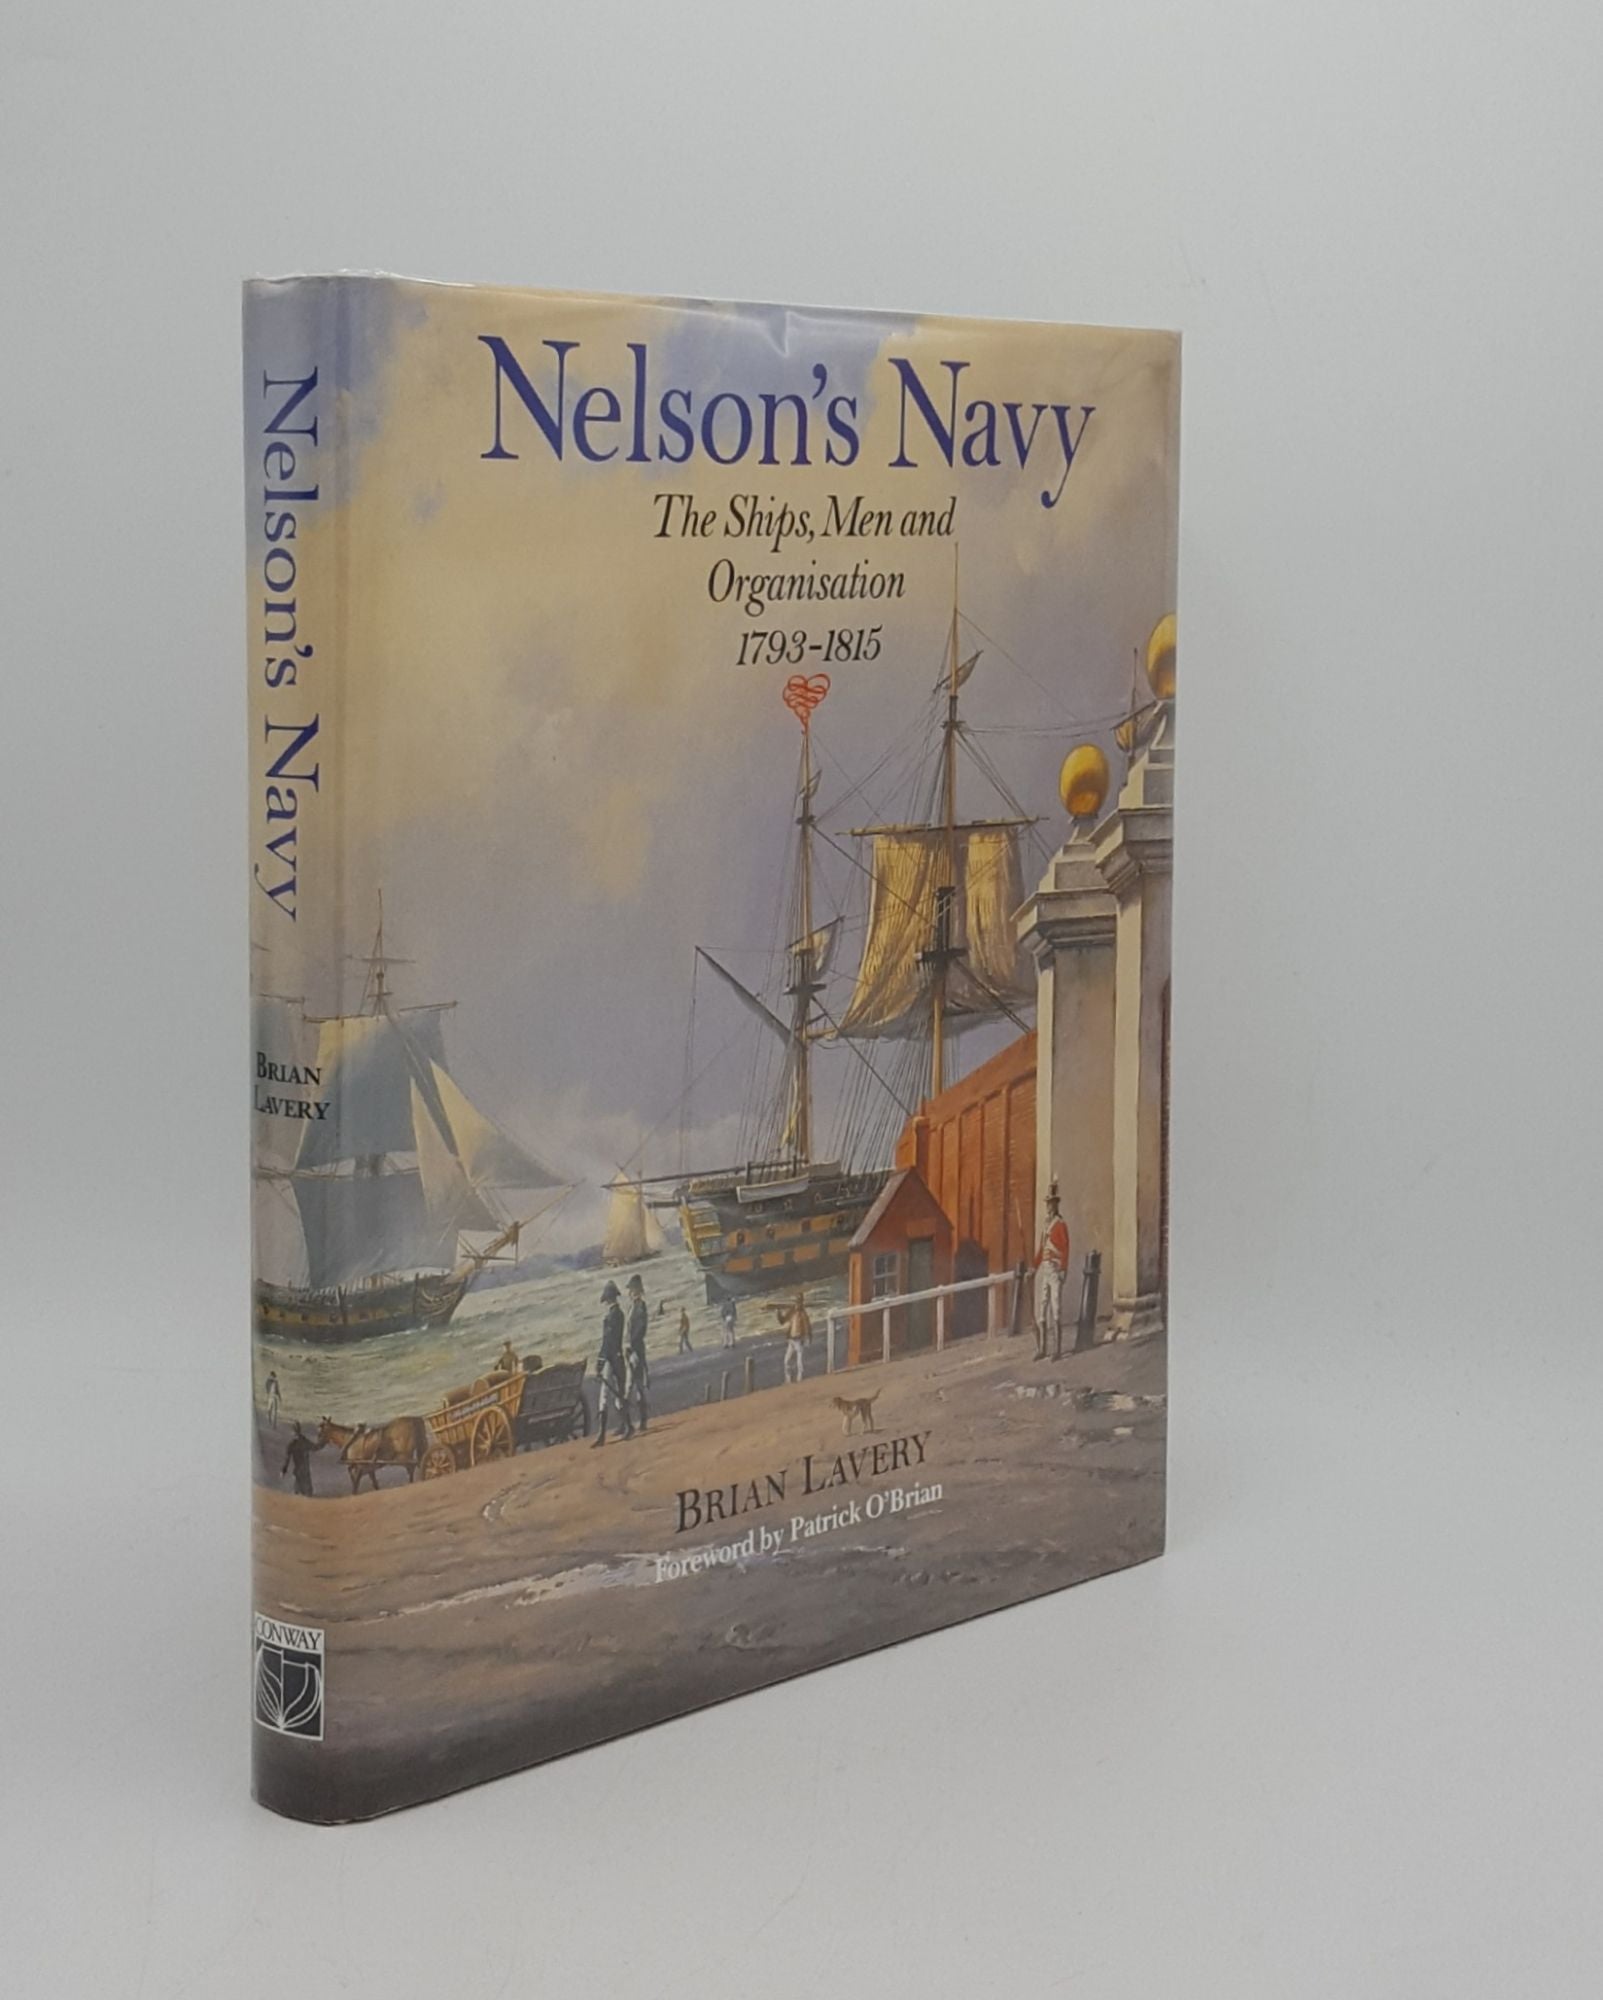 LAVERY Brian - Nelson's Navy the Ships Men and Organisation 1793-1815